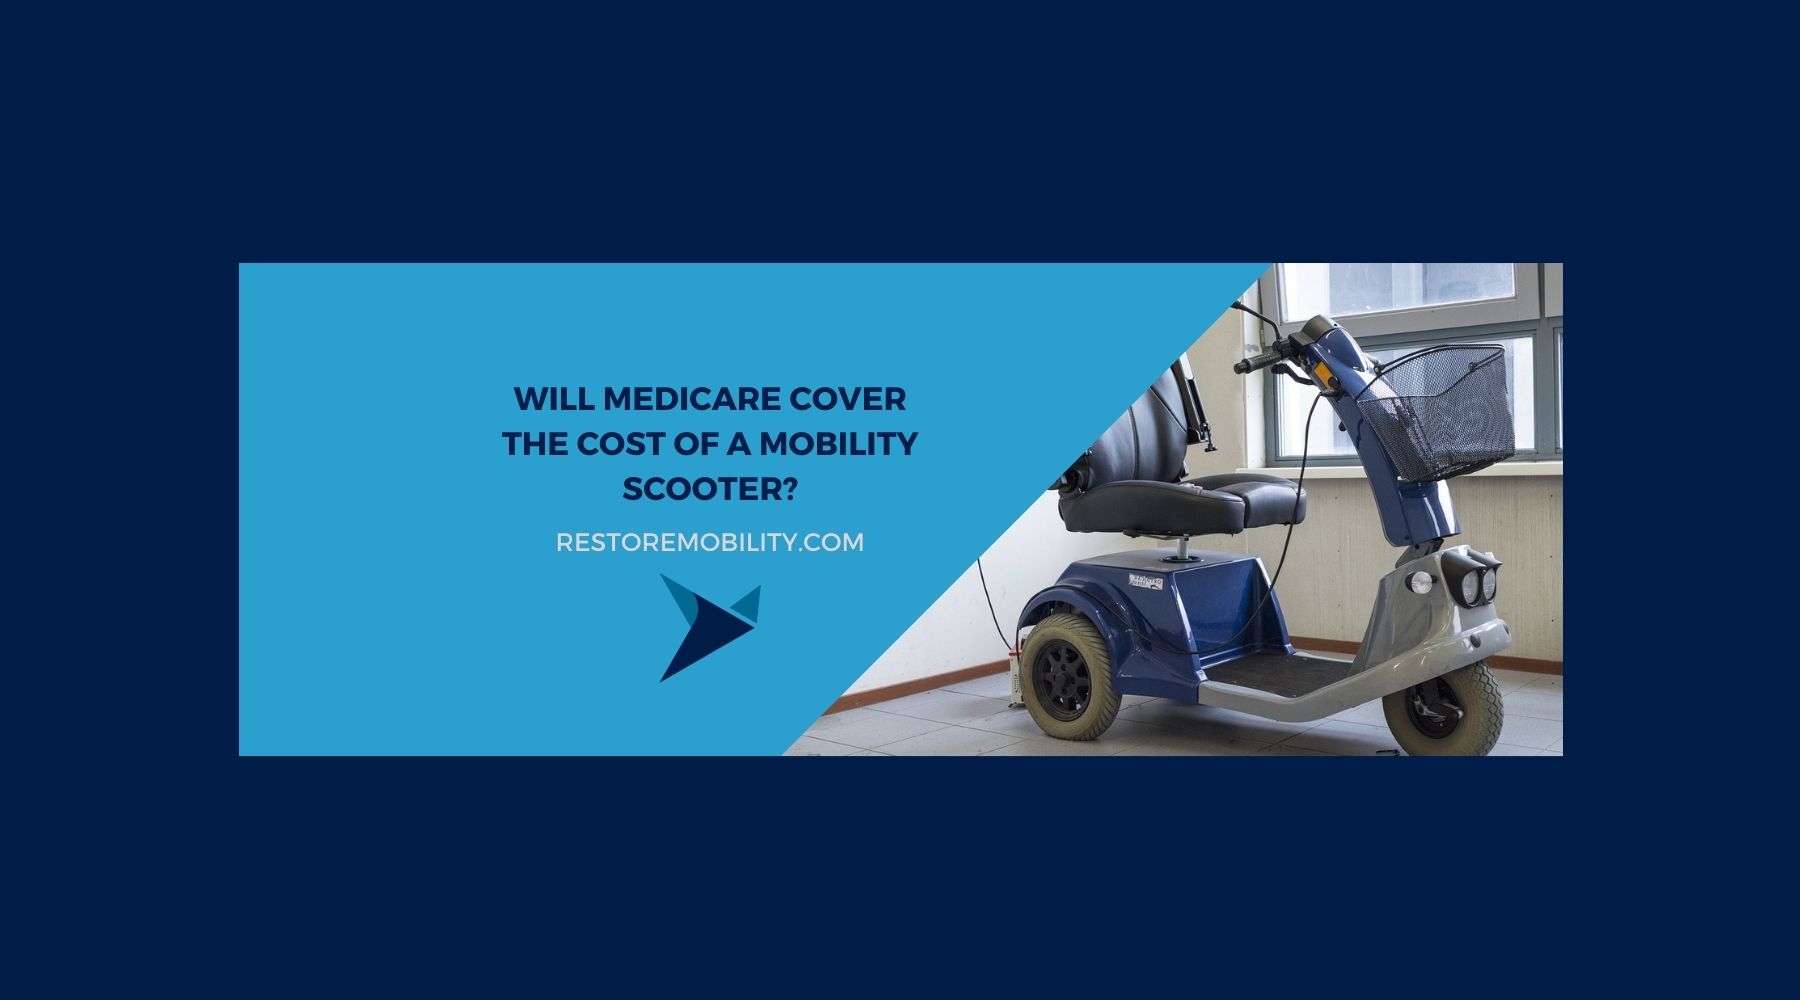 Will Medicare Cover the Cost of a Mobility Scooter?